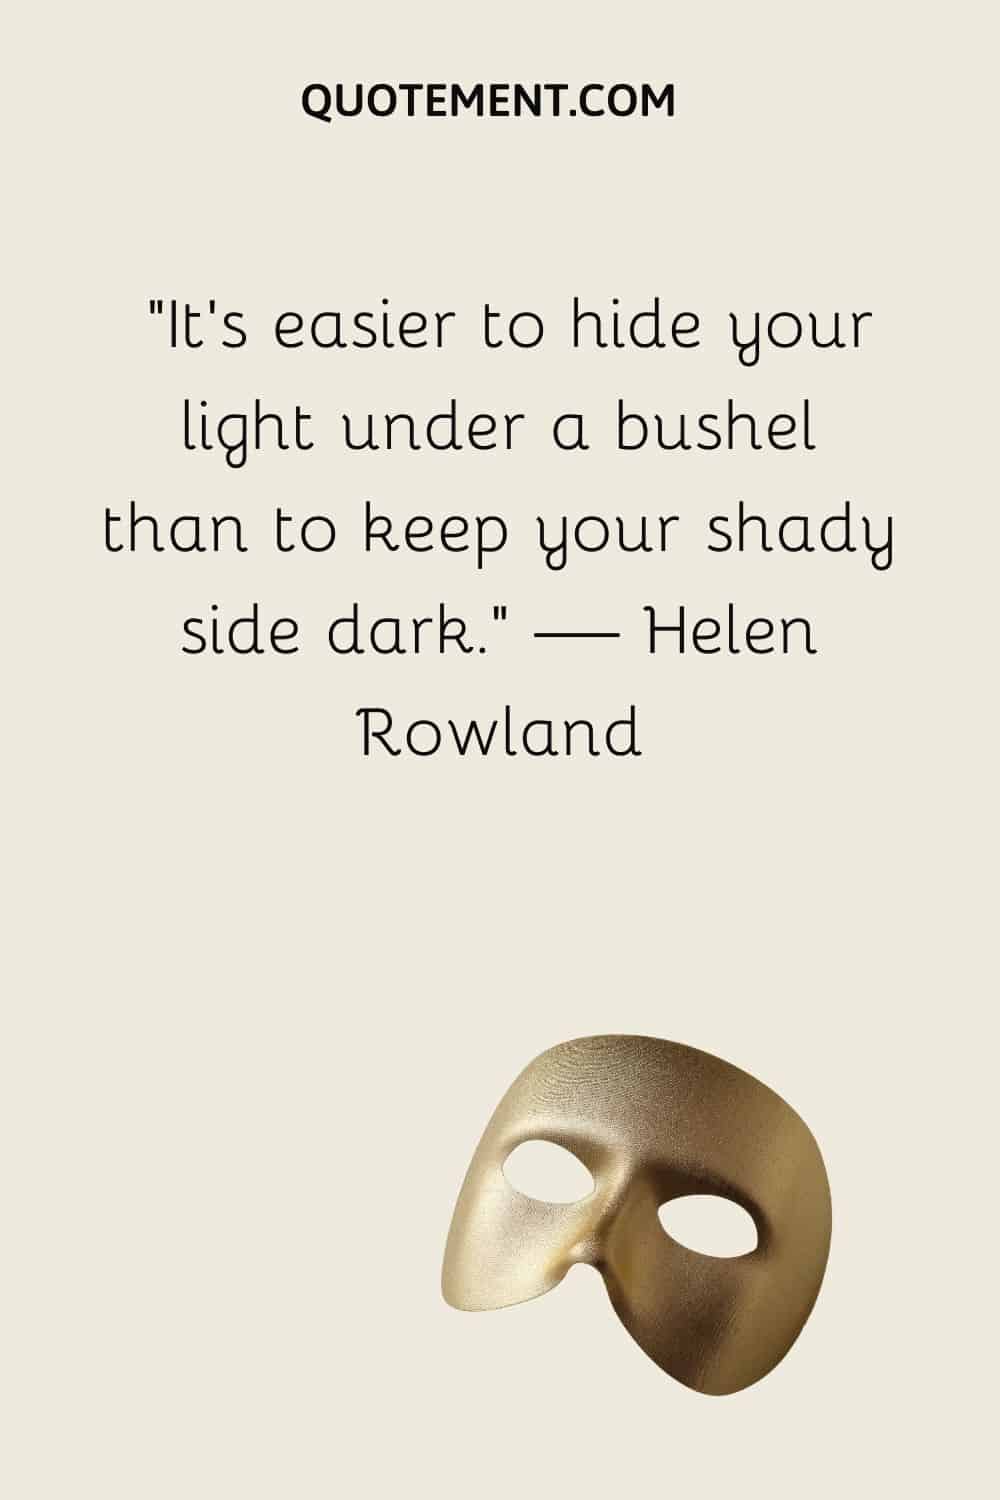 It’s easier to hide your light under a bushel than to keep your shady side dark